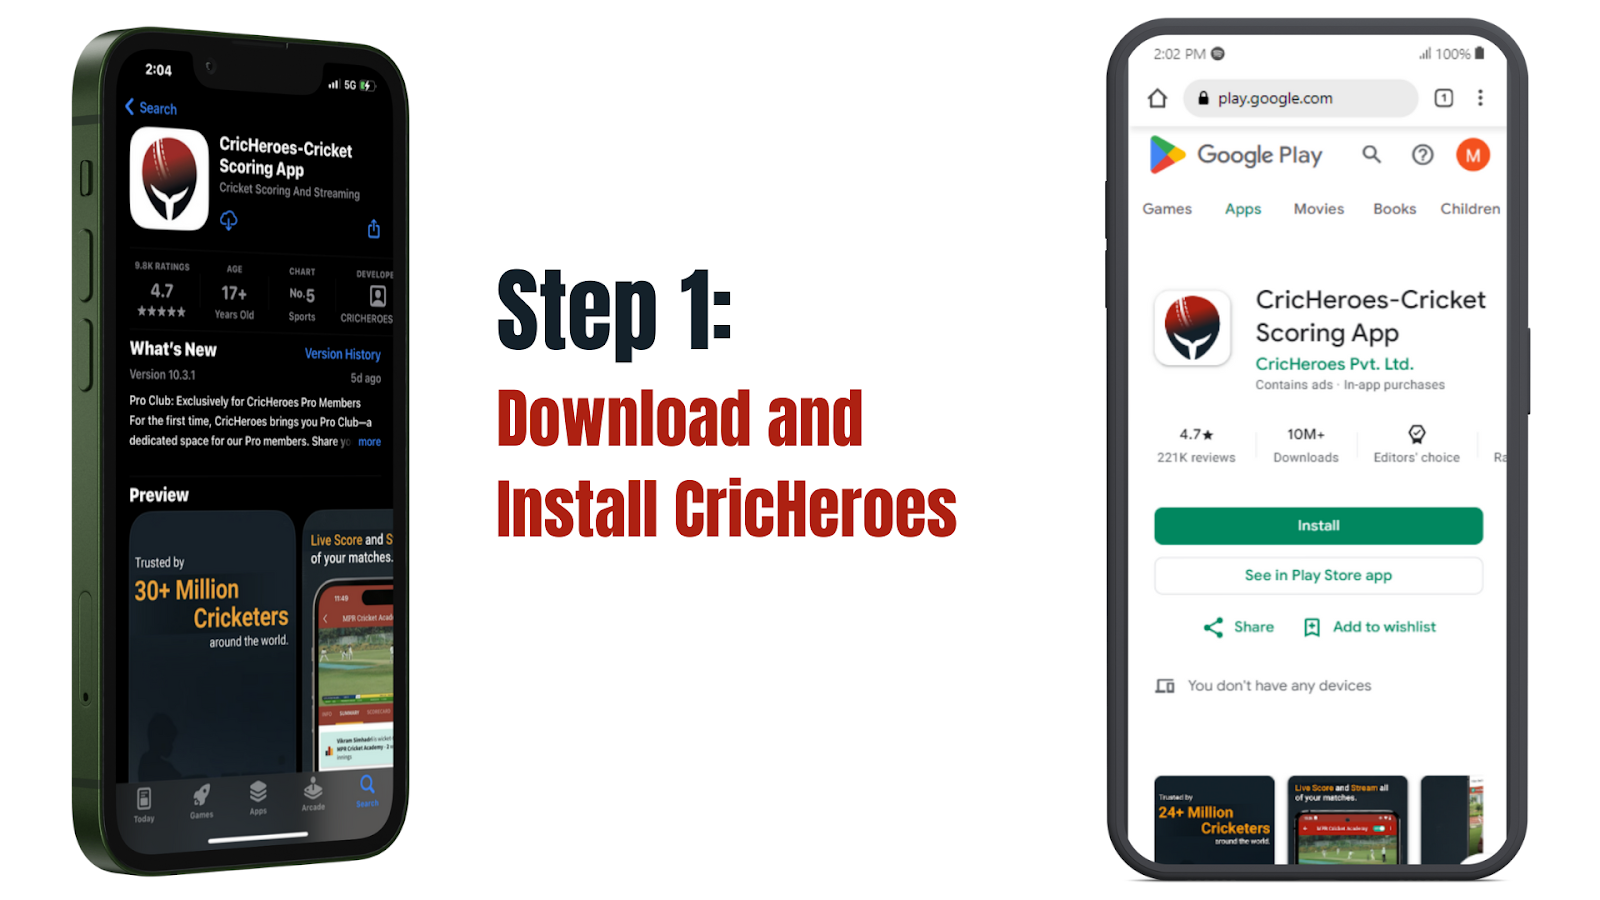 Download and Install CricHeroes